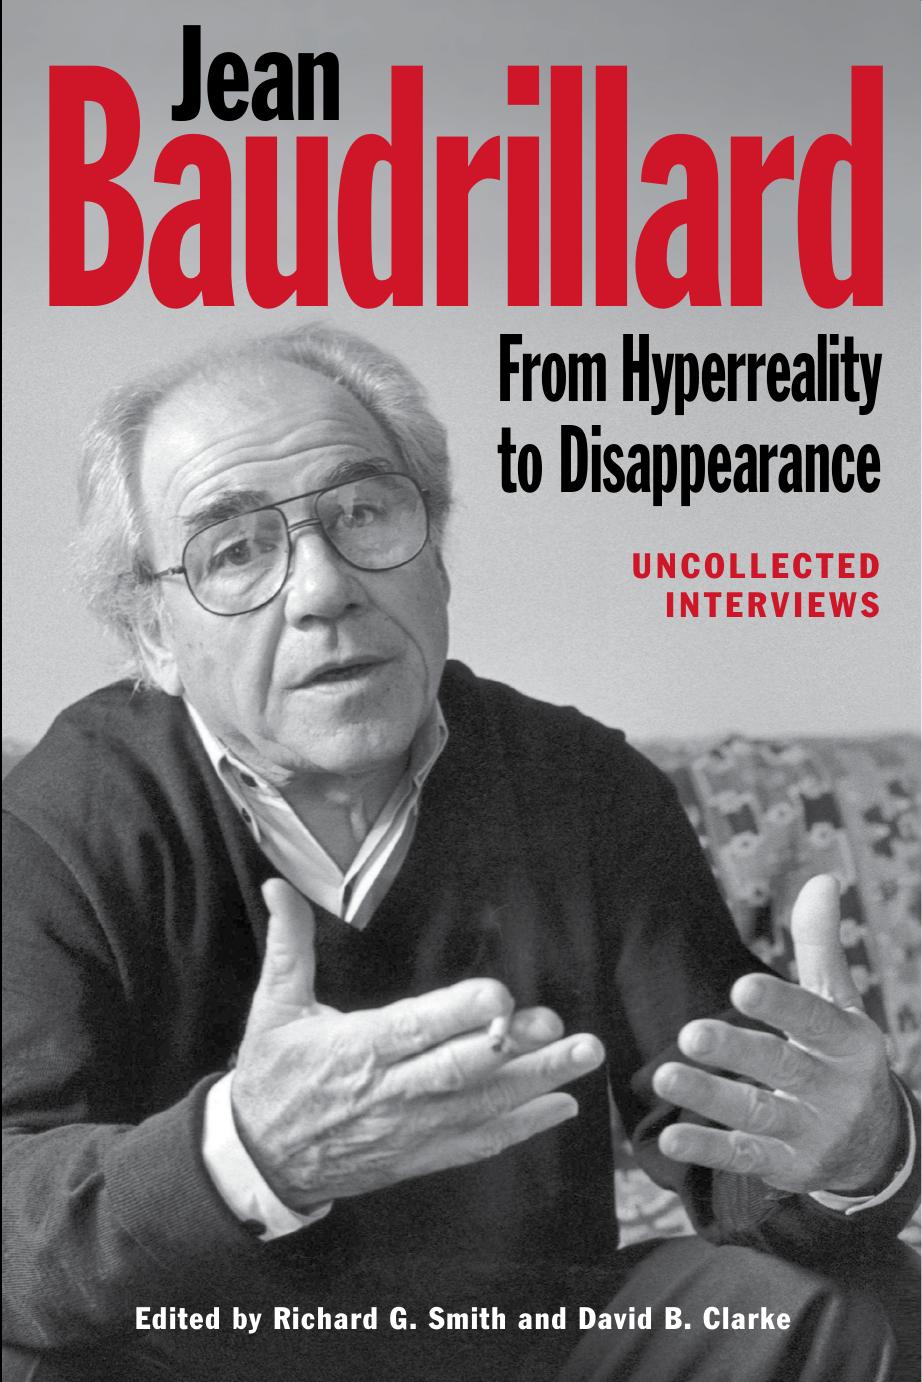 Jean Baudrillard: From Hyperreality to Disappearance; Uncollected Interviews 1986 to 2007